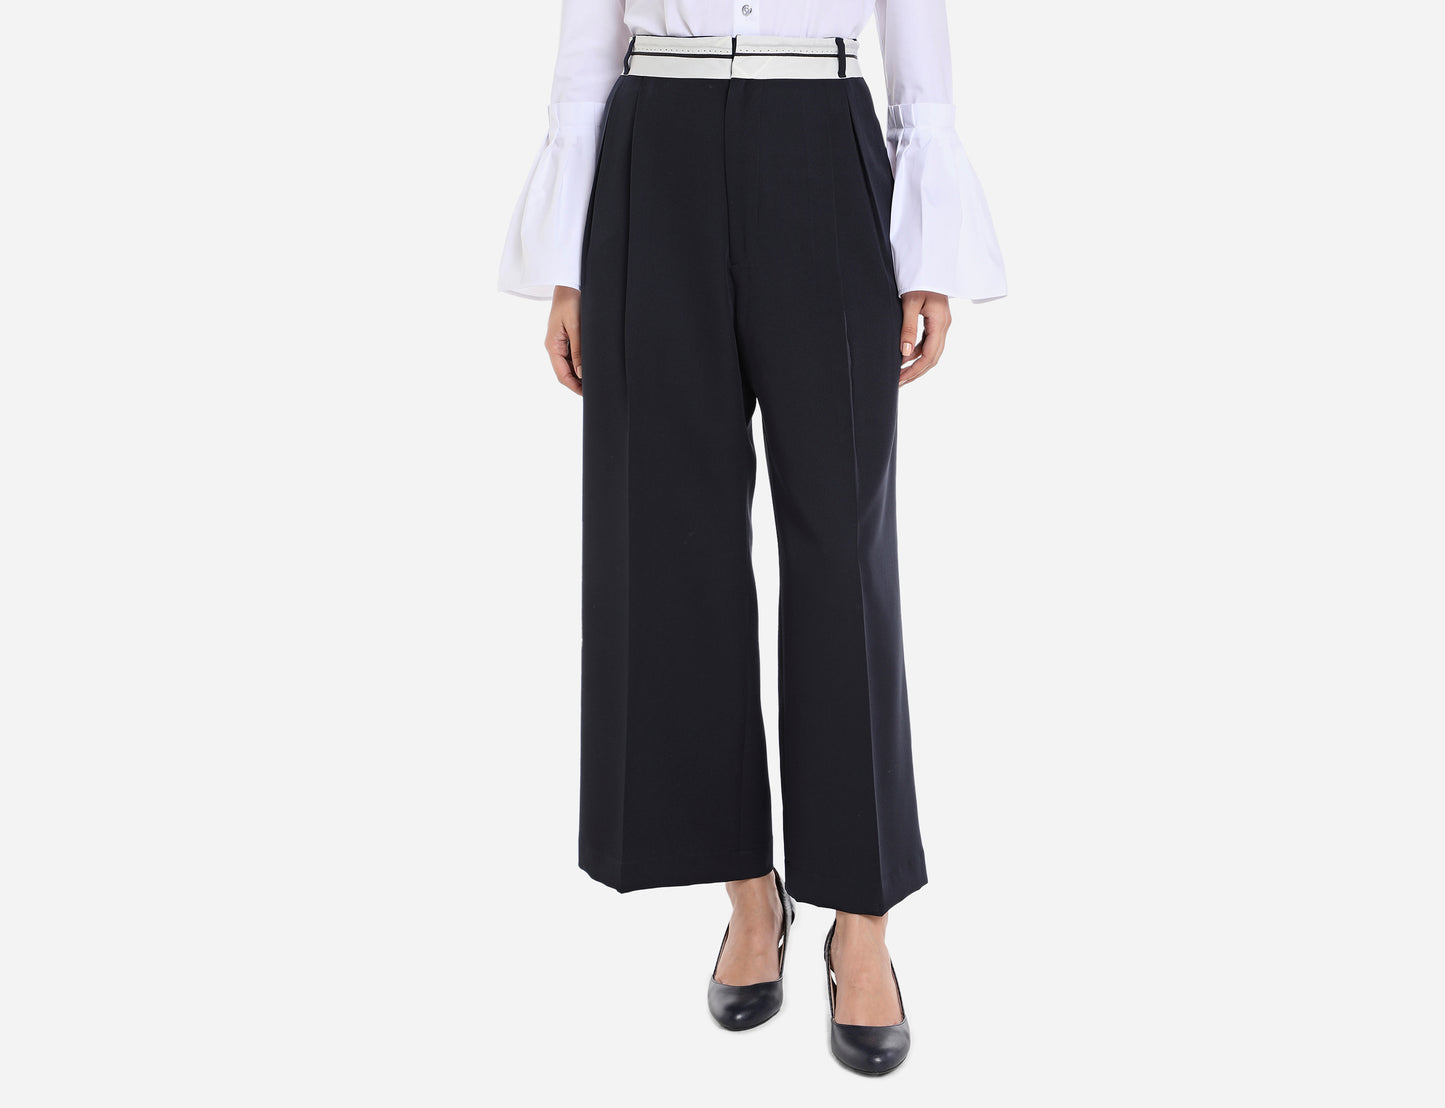 Masculine Trousers with gripper